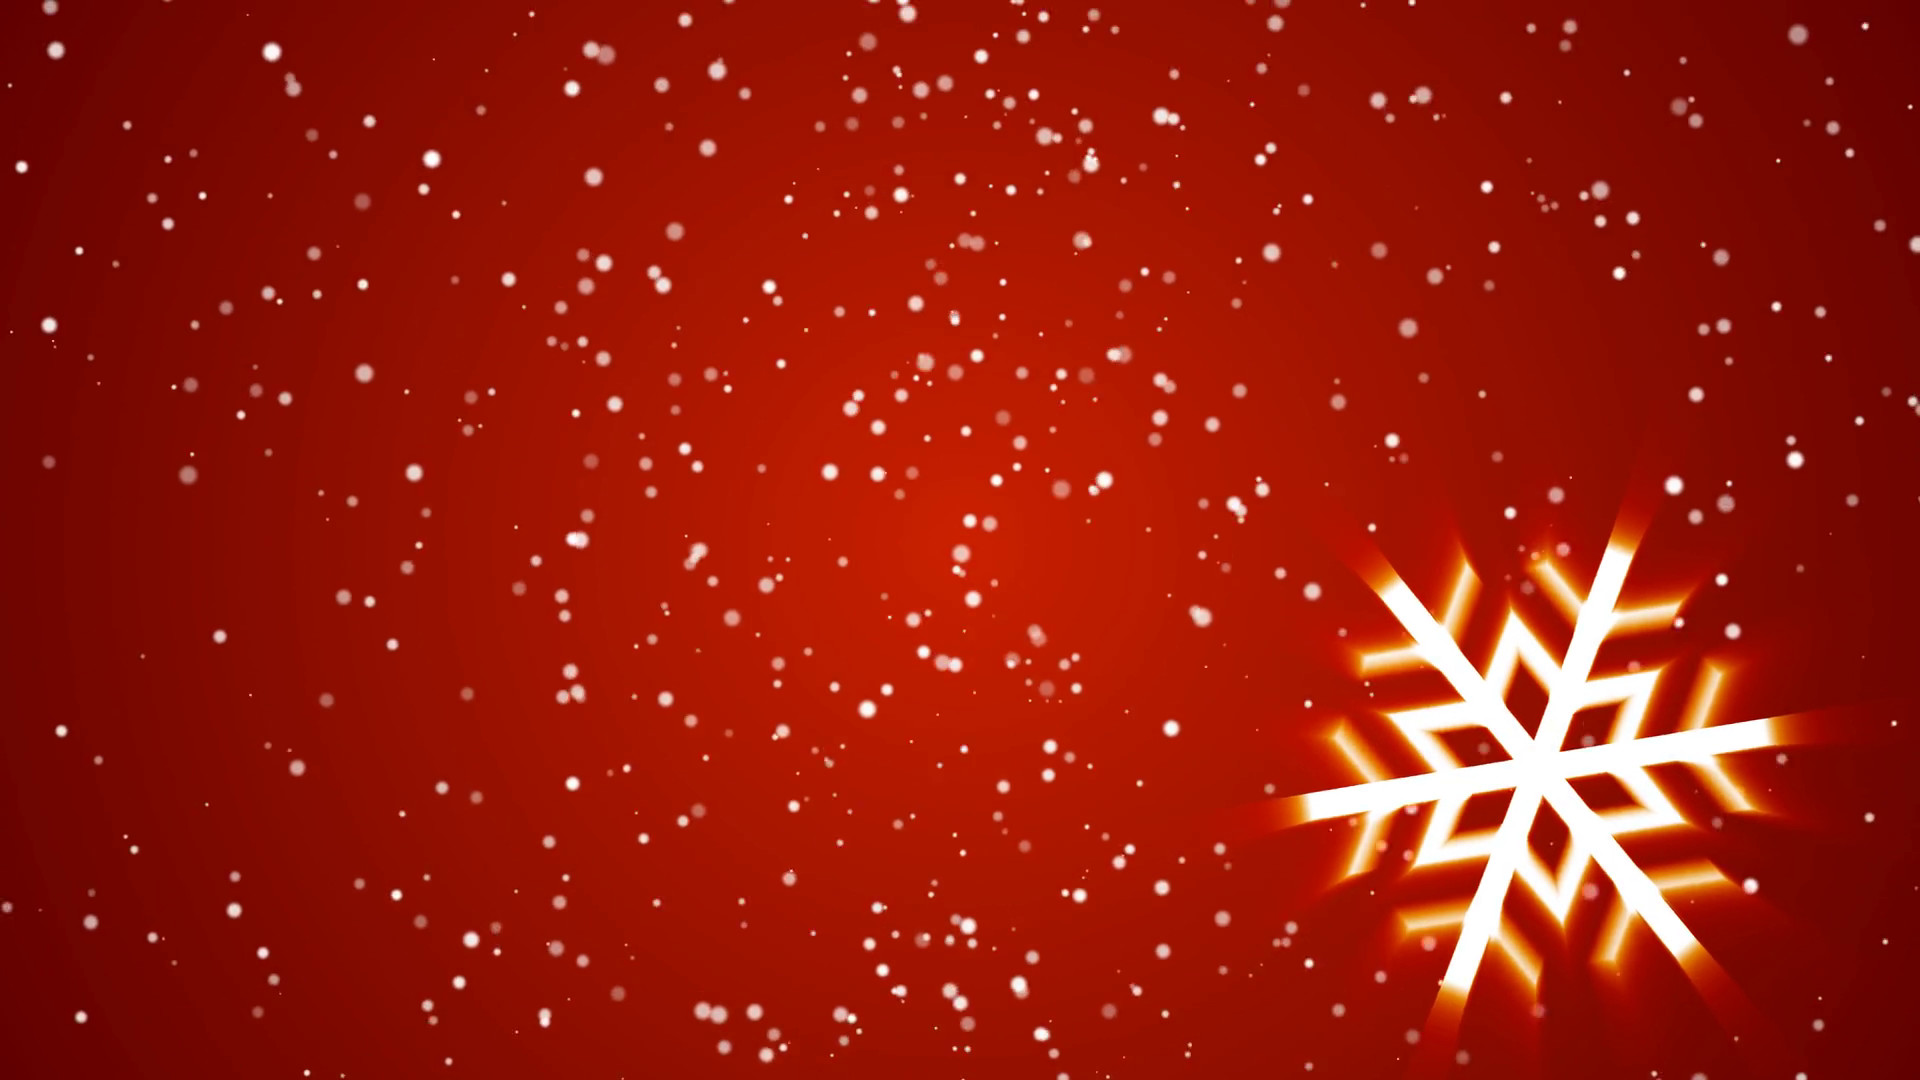 1920x1080 A glowing large snowflake sits in the bottom right corner as snow falls on  a red